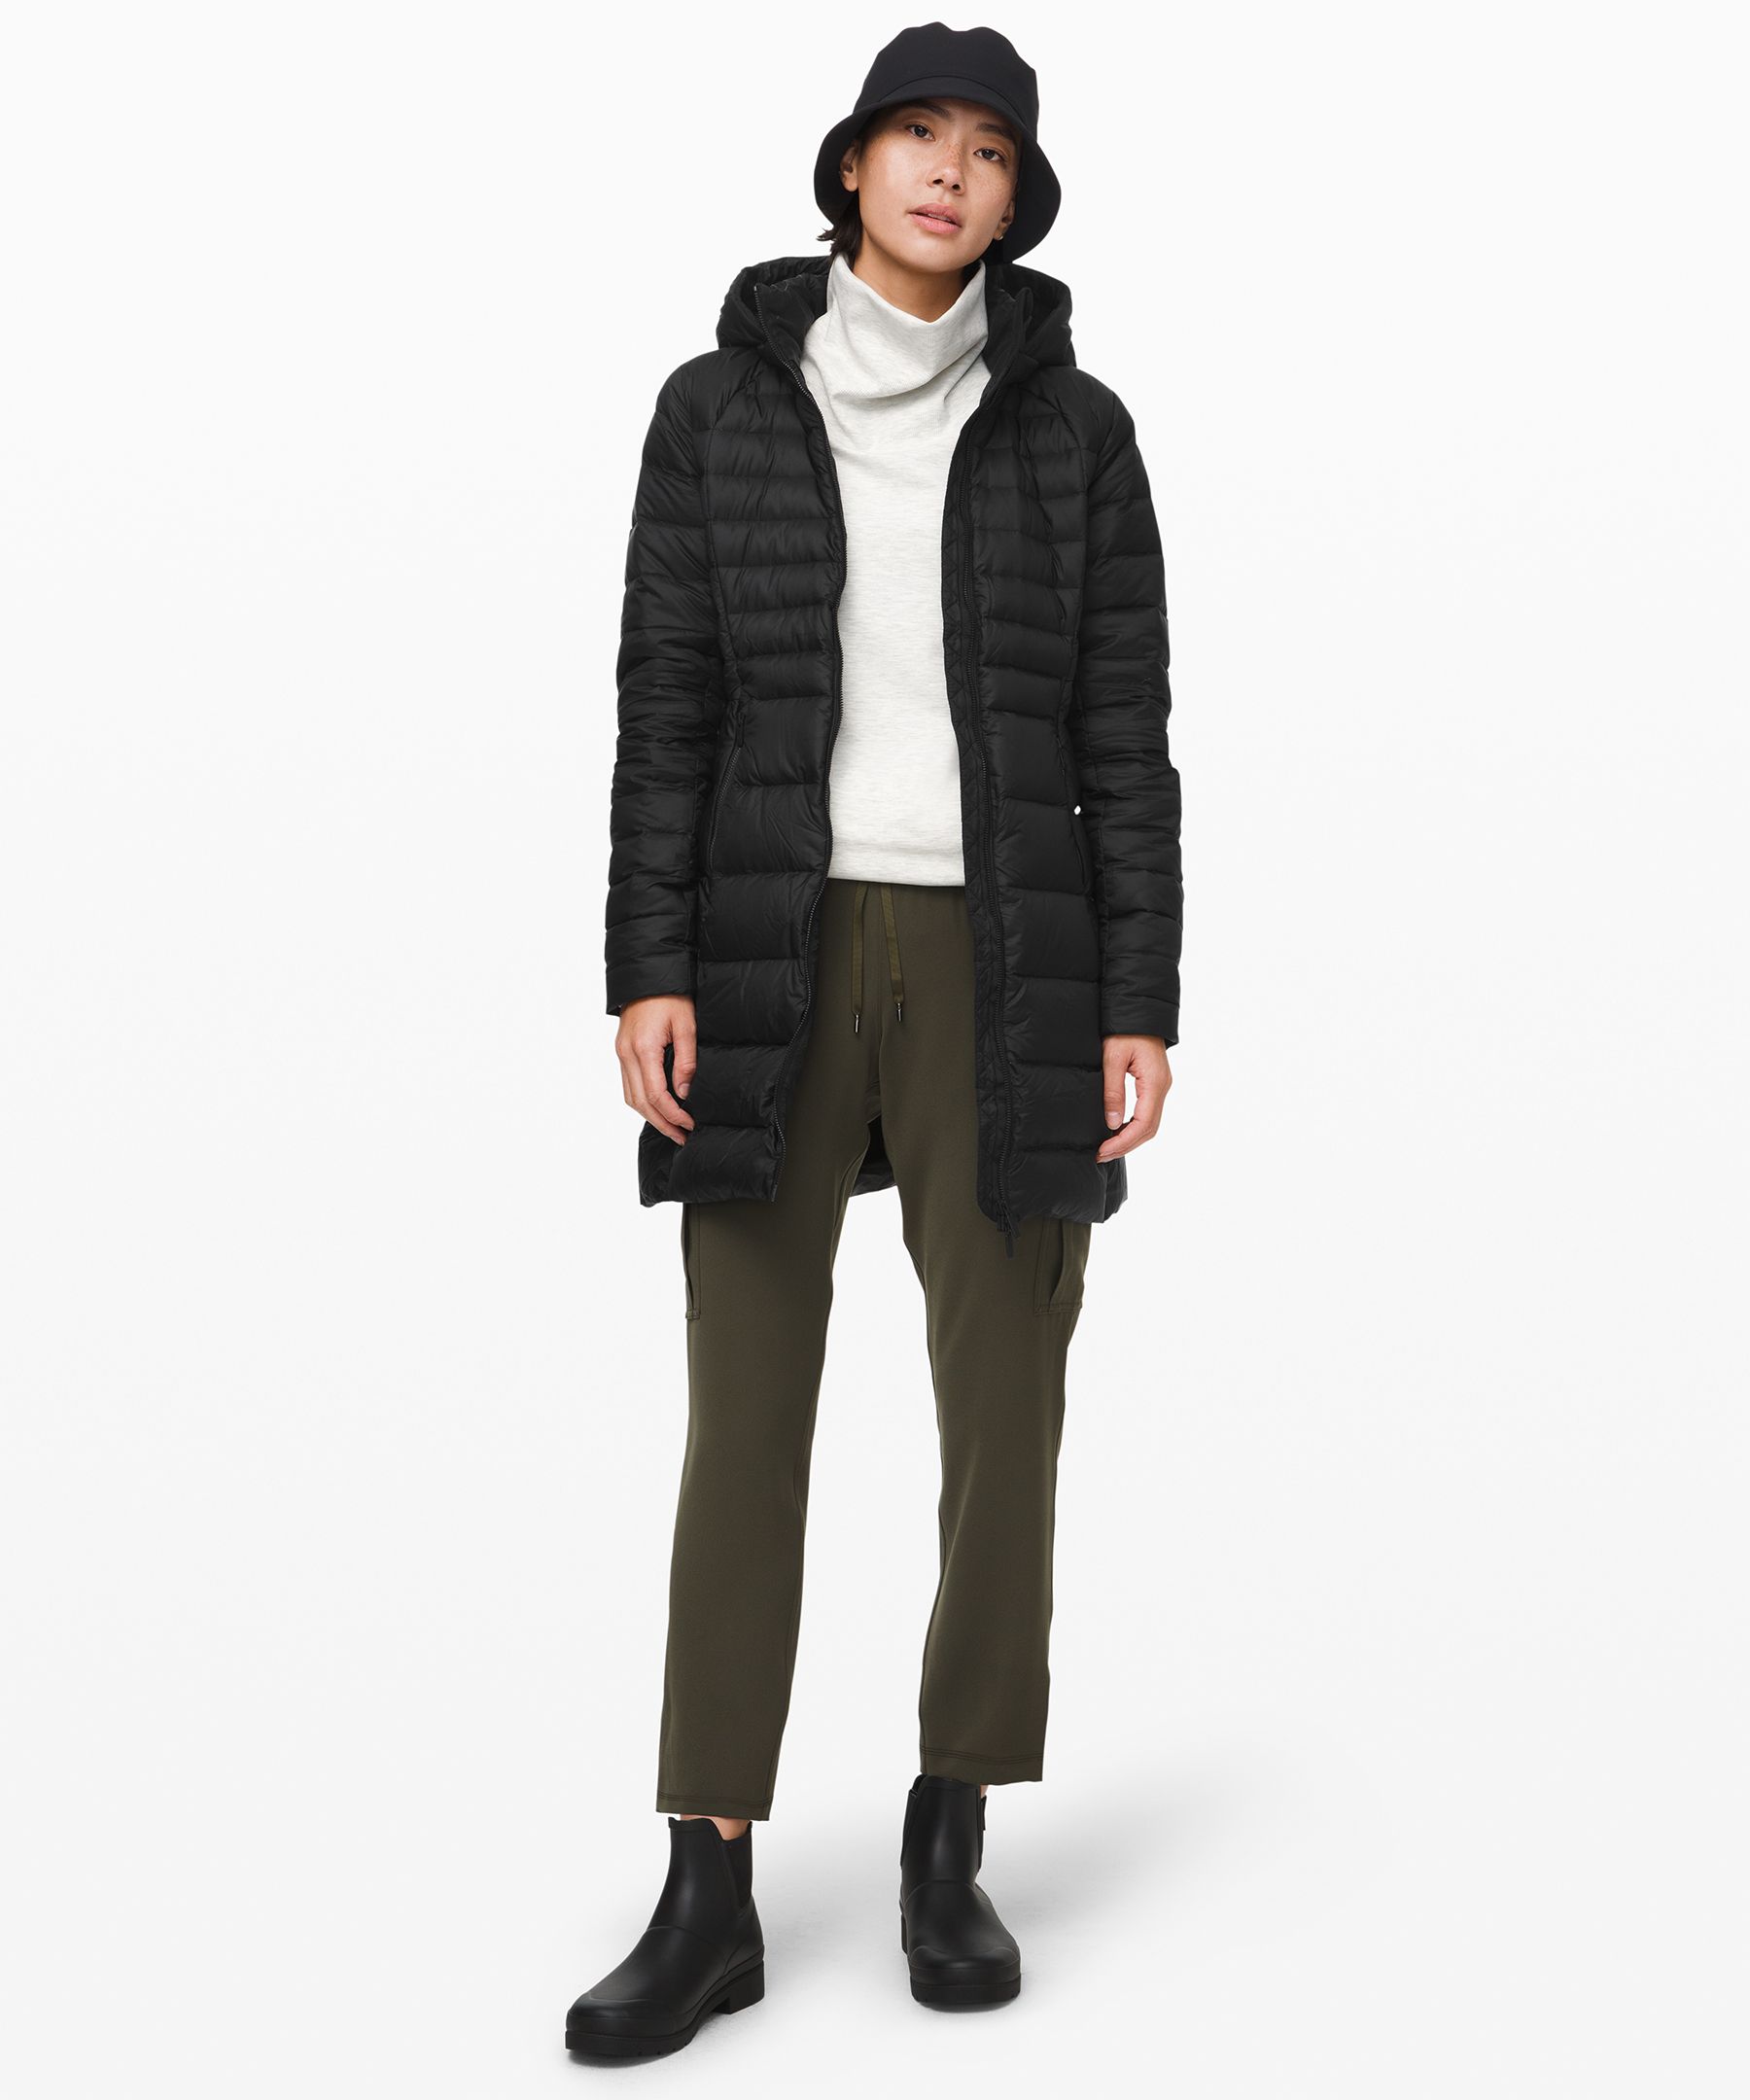 Ready to brave the cold with Ready to Rulu and Wunder Puff jacket